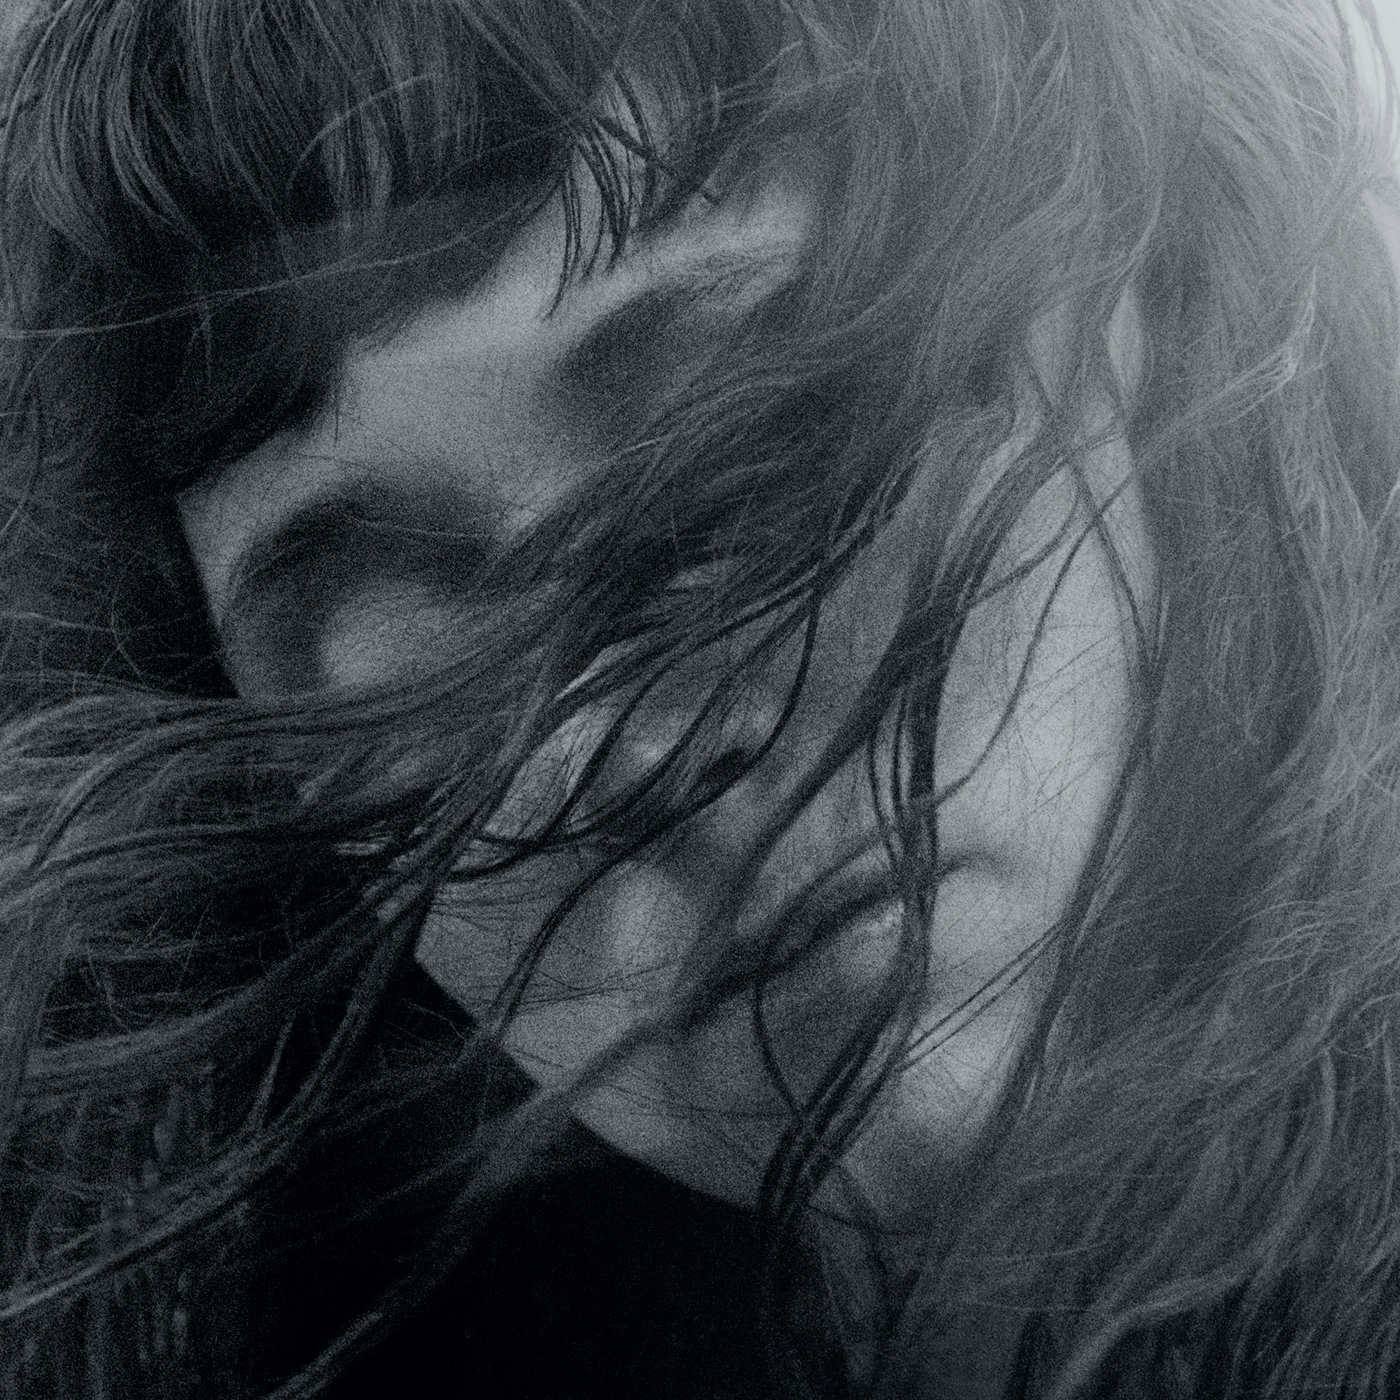 Waxahatchee - Out In The Storm {Deluxe Edition} (2017) [Bandcamp 24bit/88,2kHz]